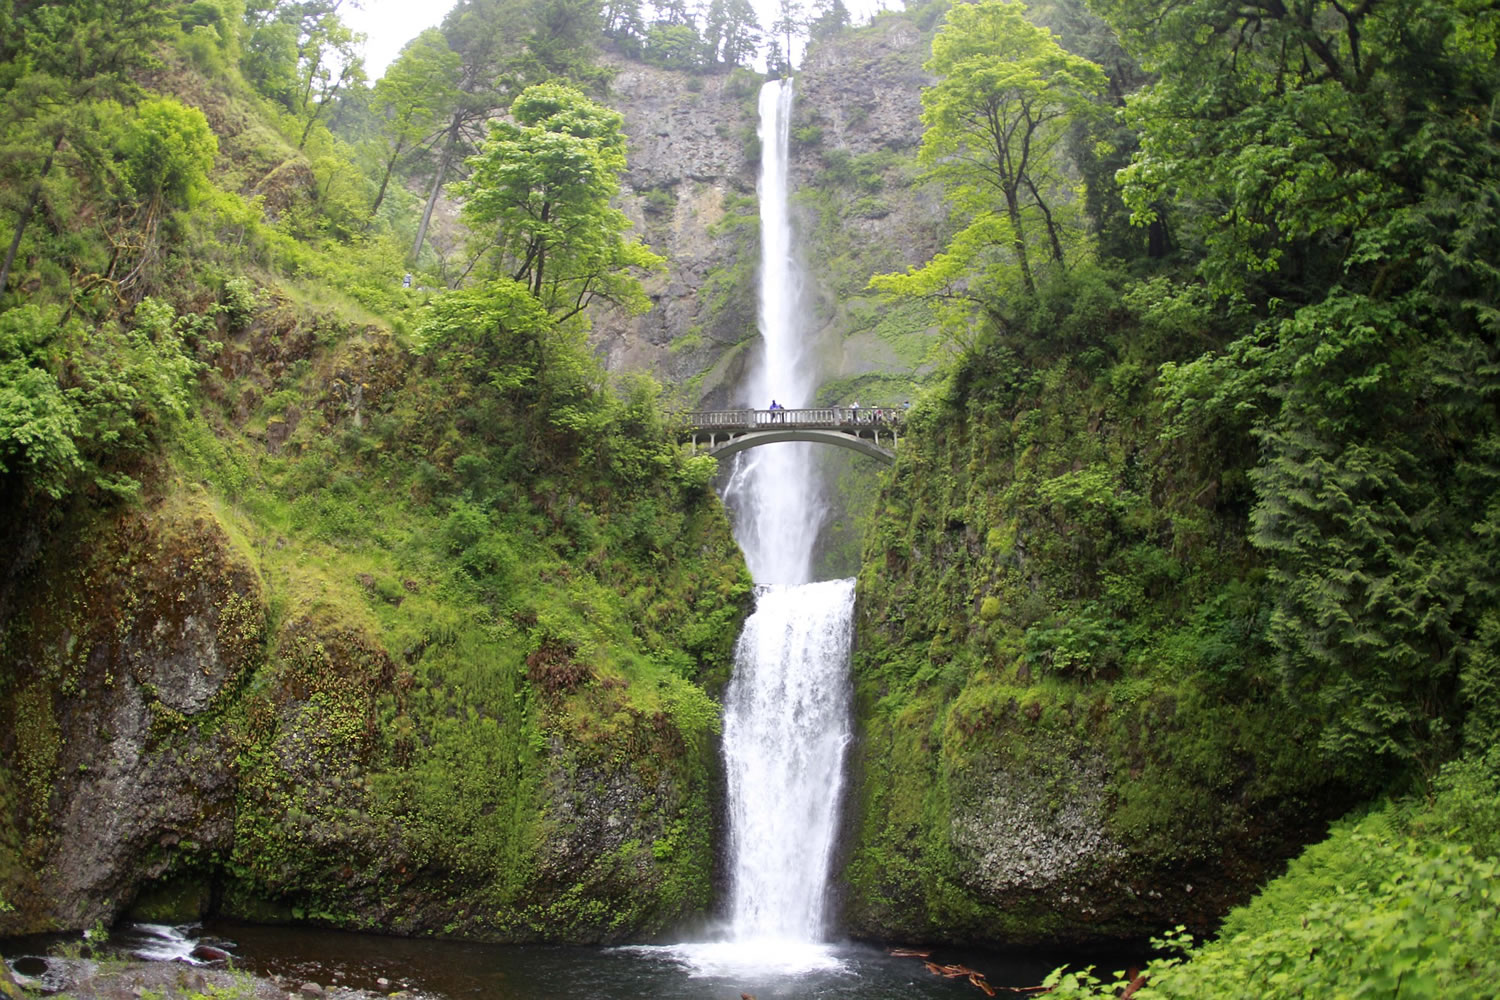 Multnomah Falls in the Columbia River Gorge, seen in June 2011, is the United States' second-tallest year-round waterfall and a year-round tourist draw.